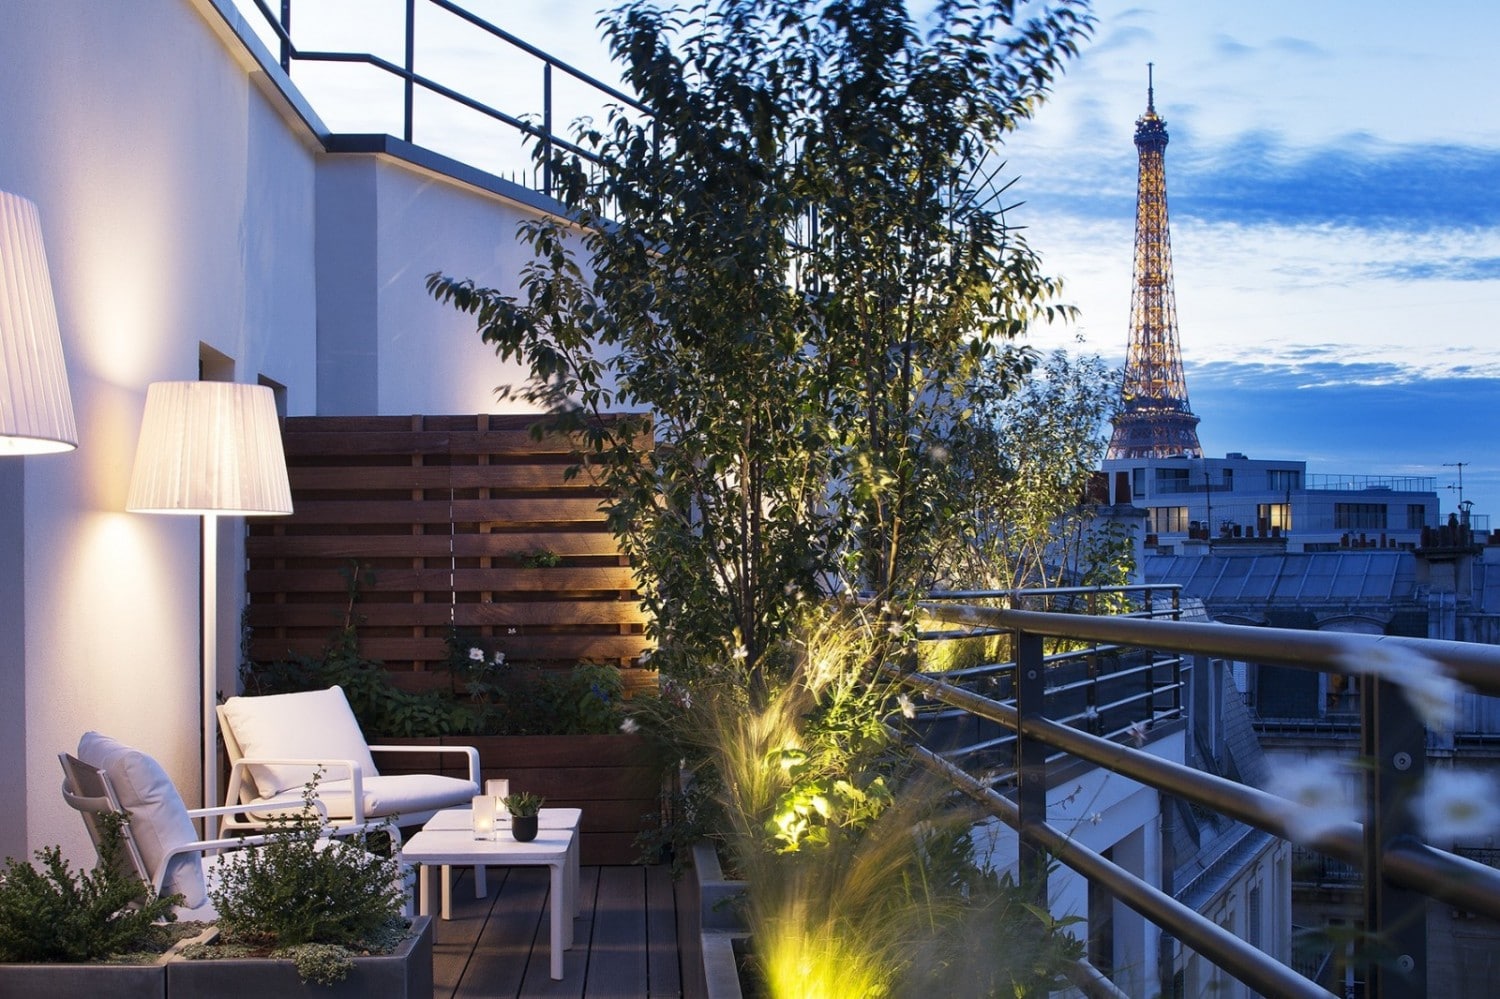 Le cinq Codet one of the best places to stay in Paris